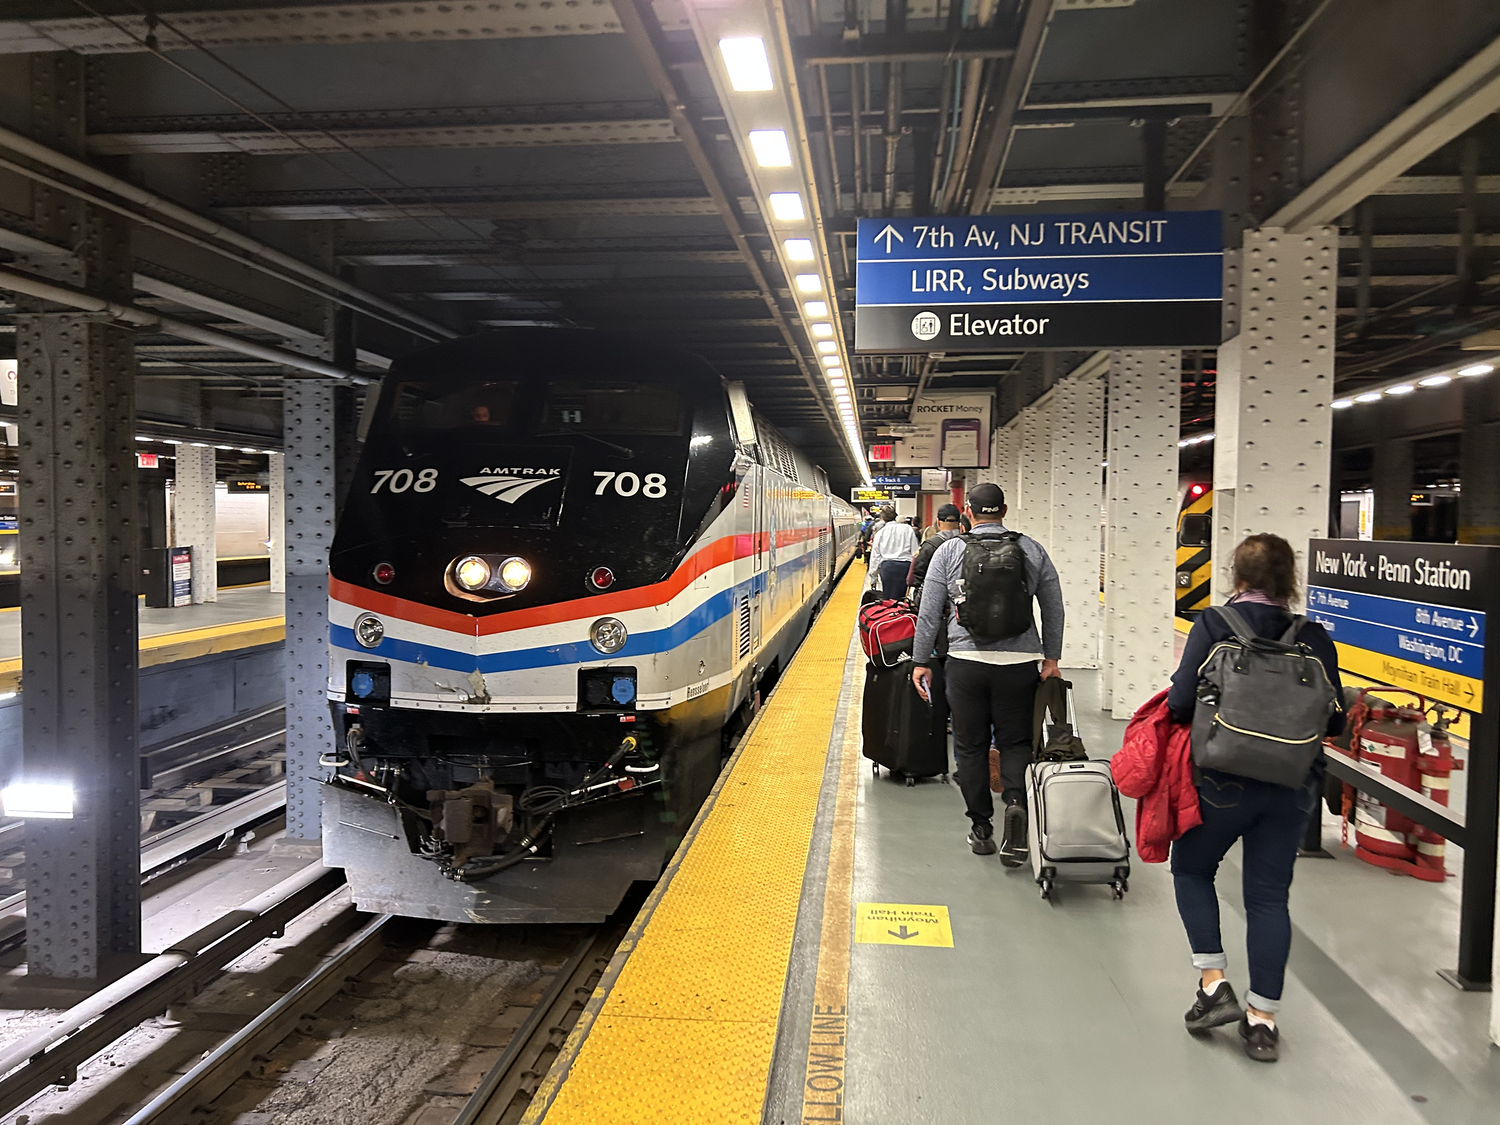 Thoughts on American rail travel after a few rides